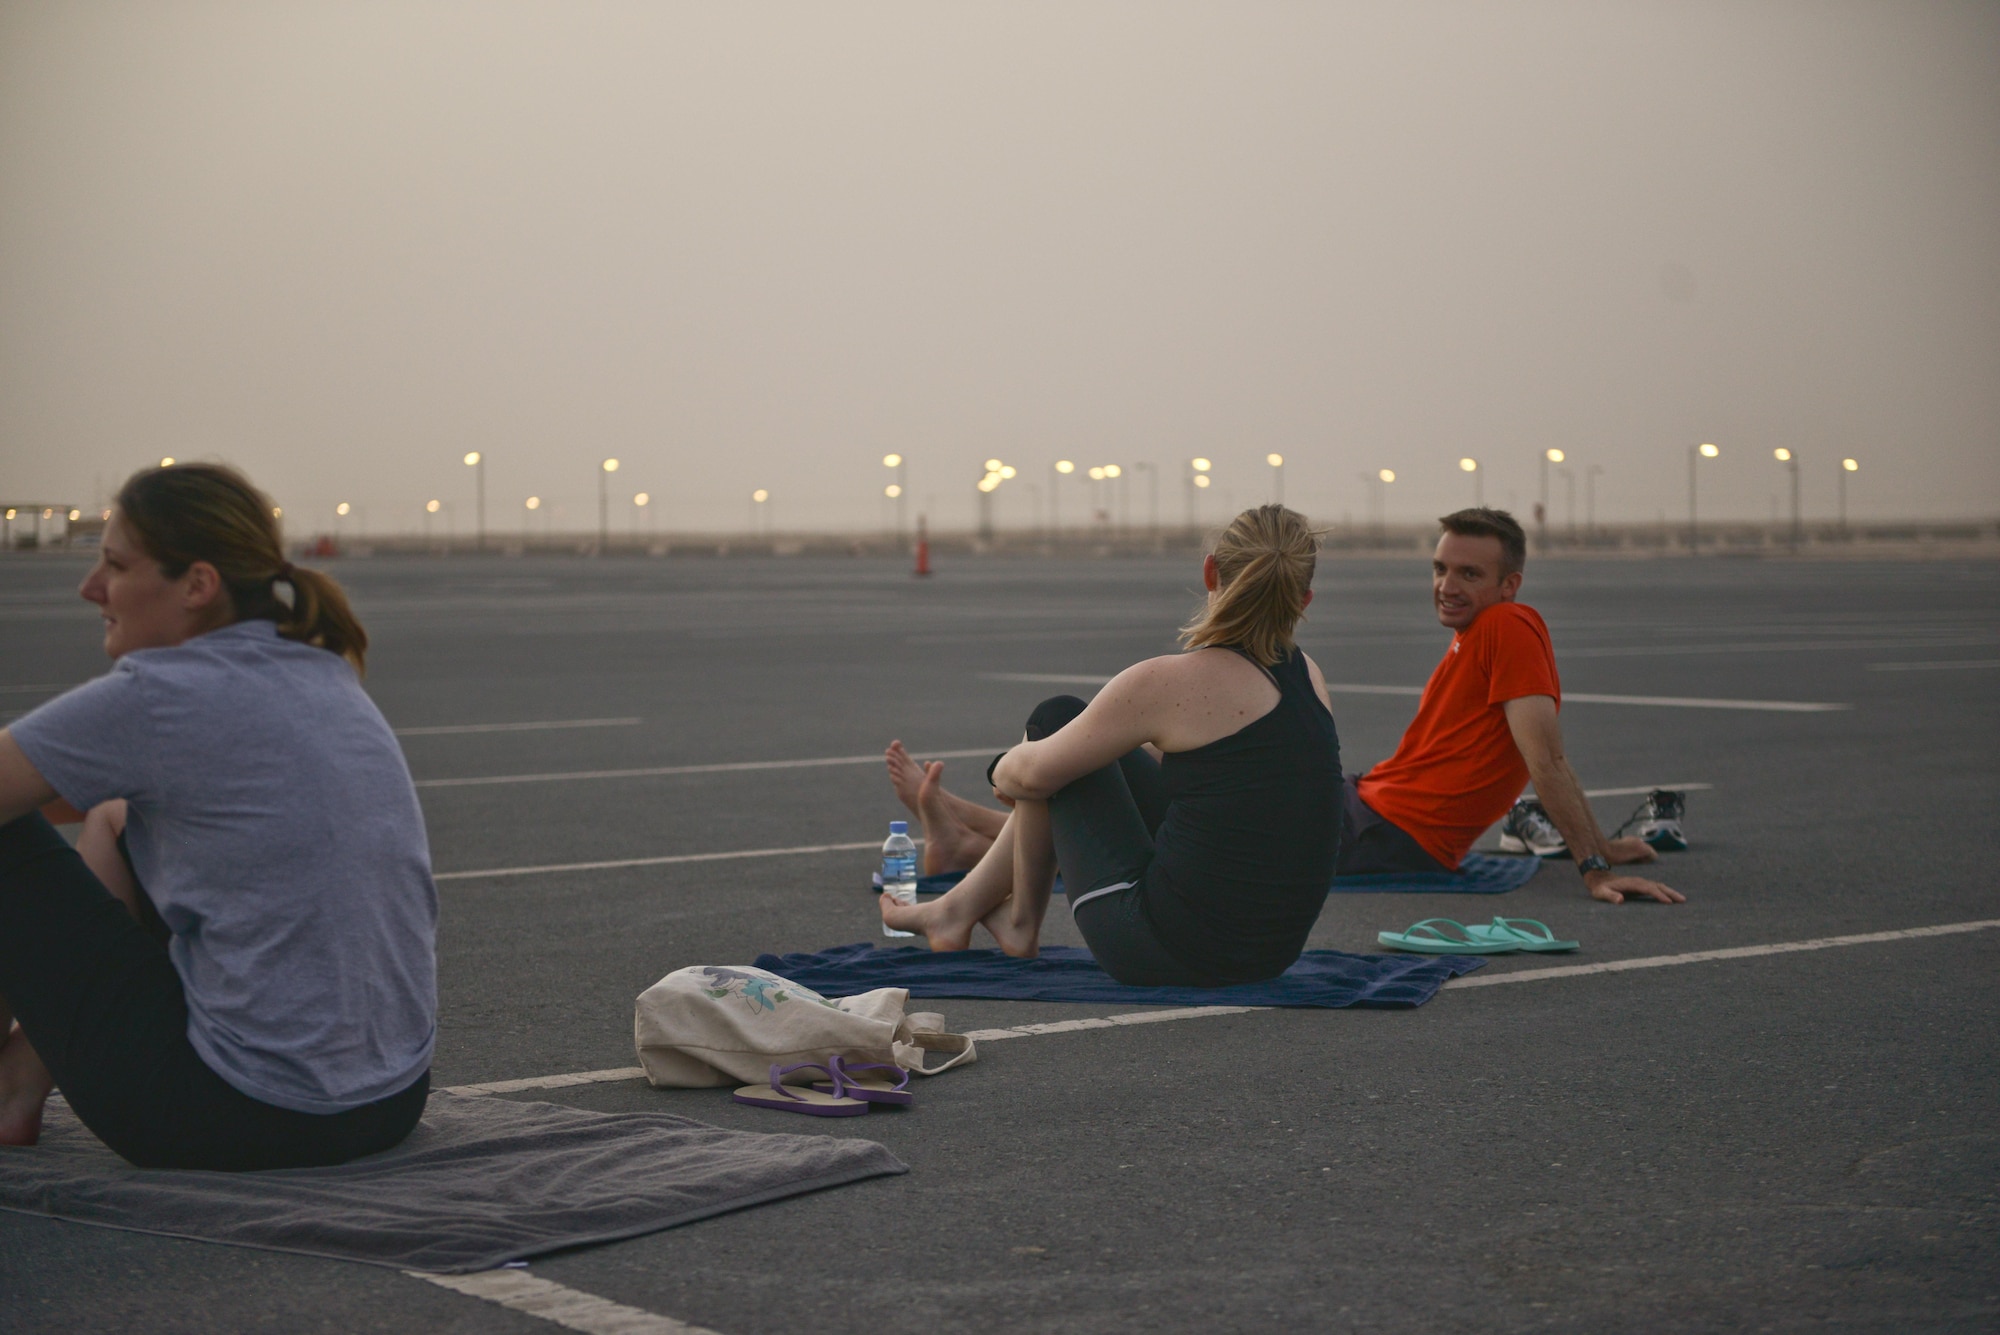 Al Udeid soldiers, sailors, airmen, marines, coalition partners and civilians meet up for the largest Yoga session to take place in Qatar history July 11, 2015 Al Udeid Air Base, Qatar. This event opened its doors to all levels of practitioners from novice to expert. It allowed the fine men and women assigned to Al Udeid Air Base to relax and enjoy a different kind of exercise in a neutral environment. (U.S. Air Force photo/Staff Sgt. Alexandre Montes)